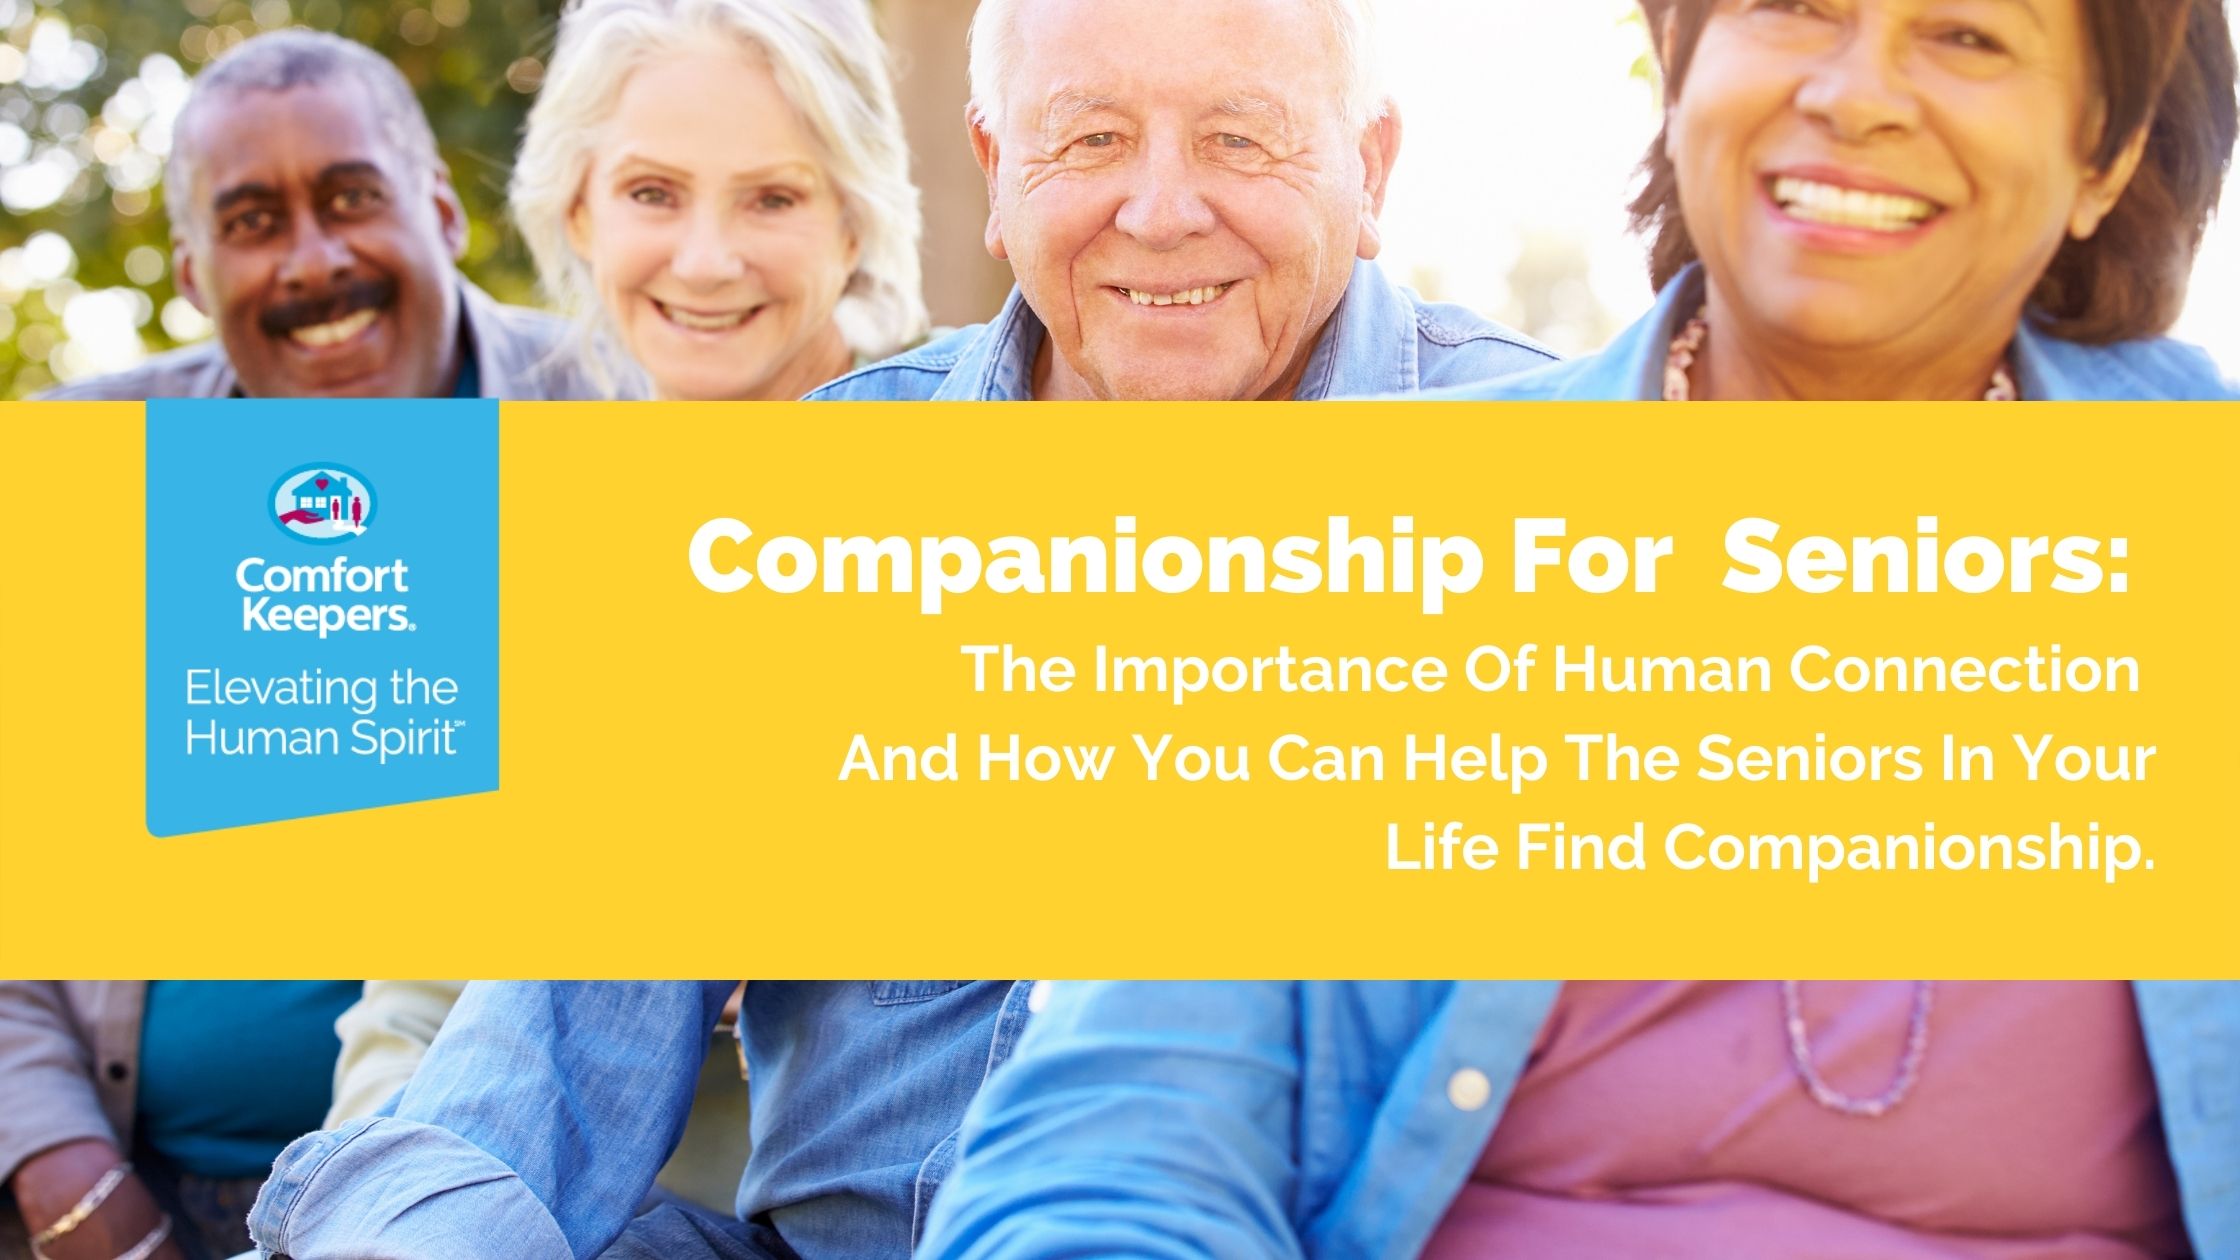 The Benefits Of Companionship For Seniors - Comfort Keepers